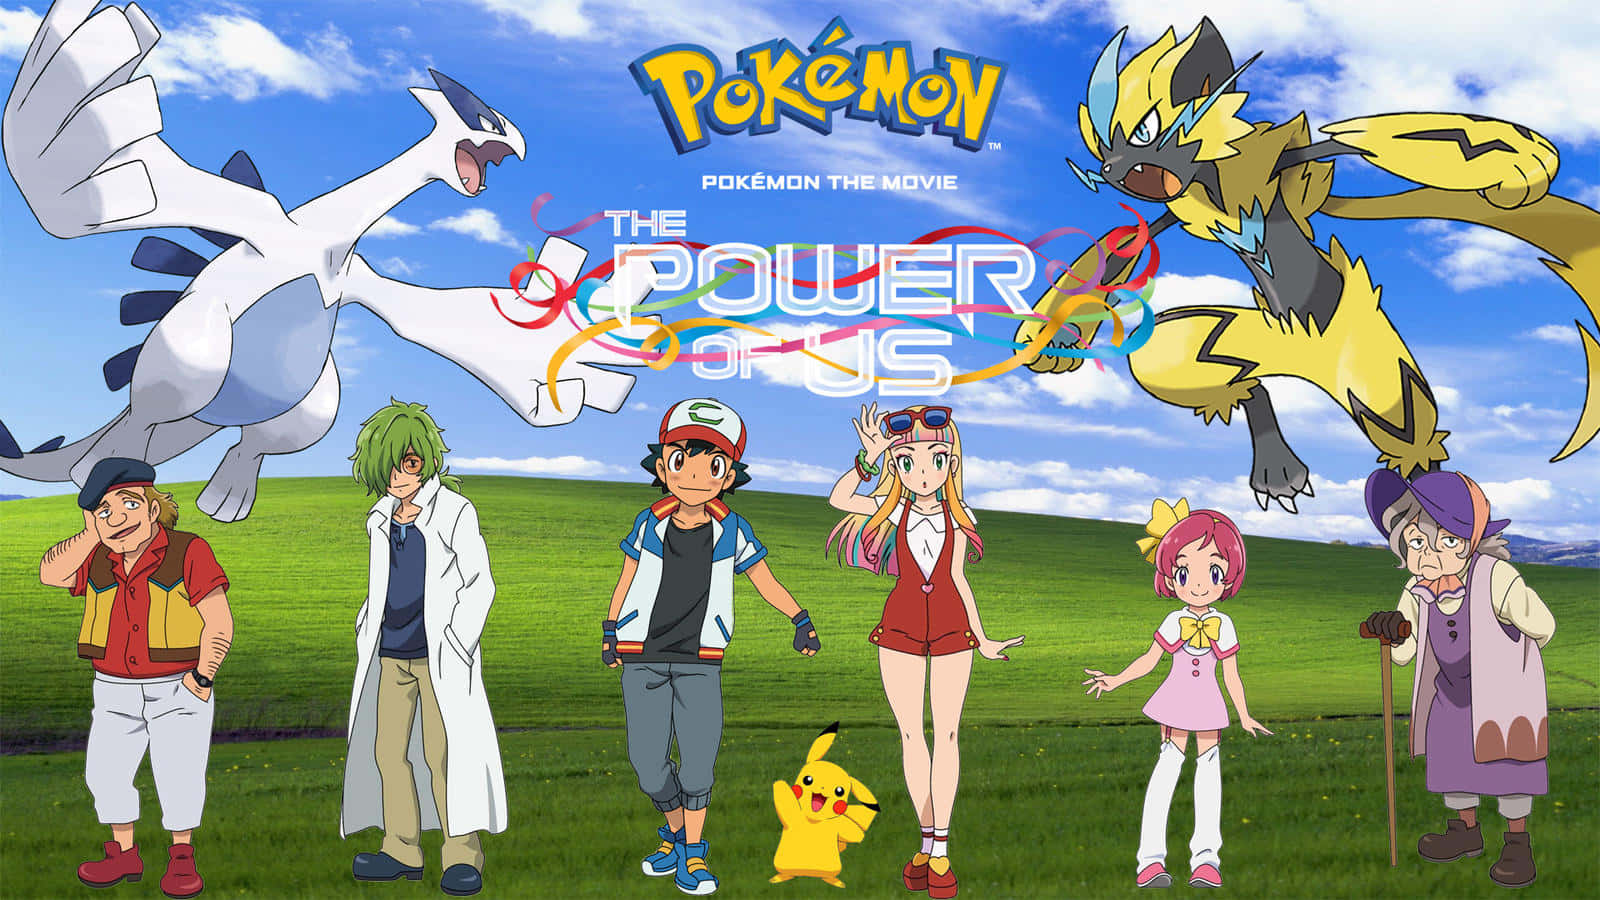 "Catch 'em all with Pokemon Movies" Wallpaper